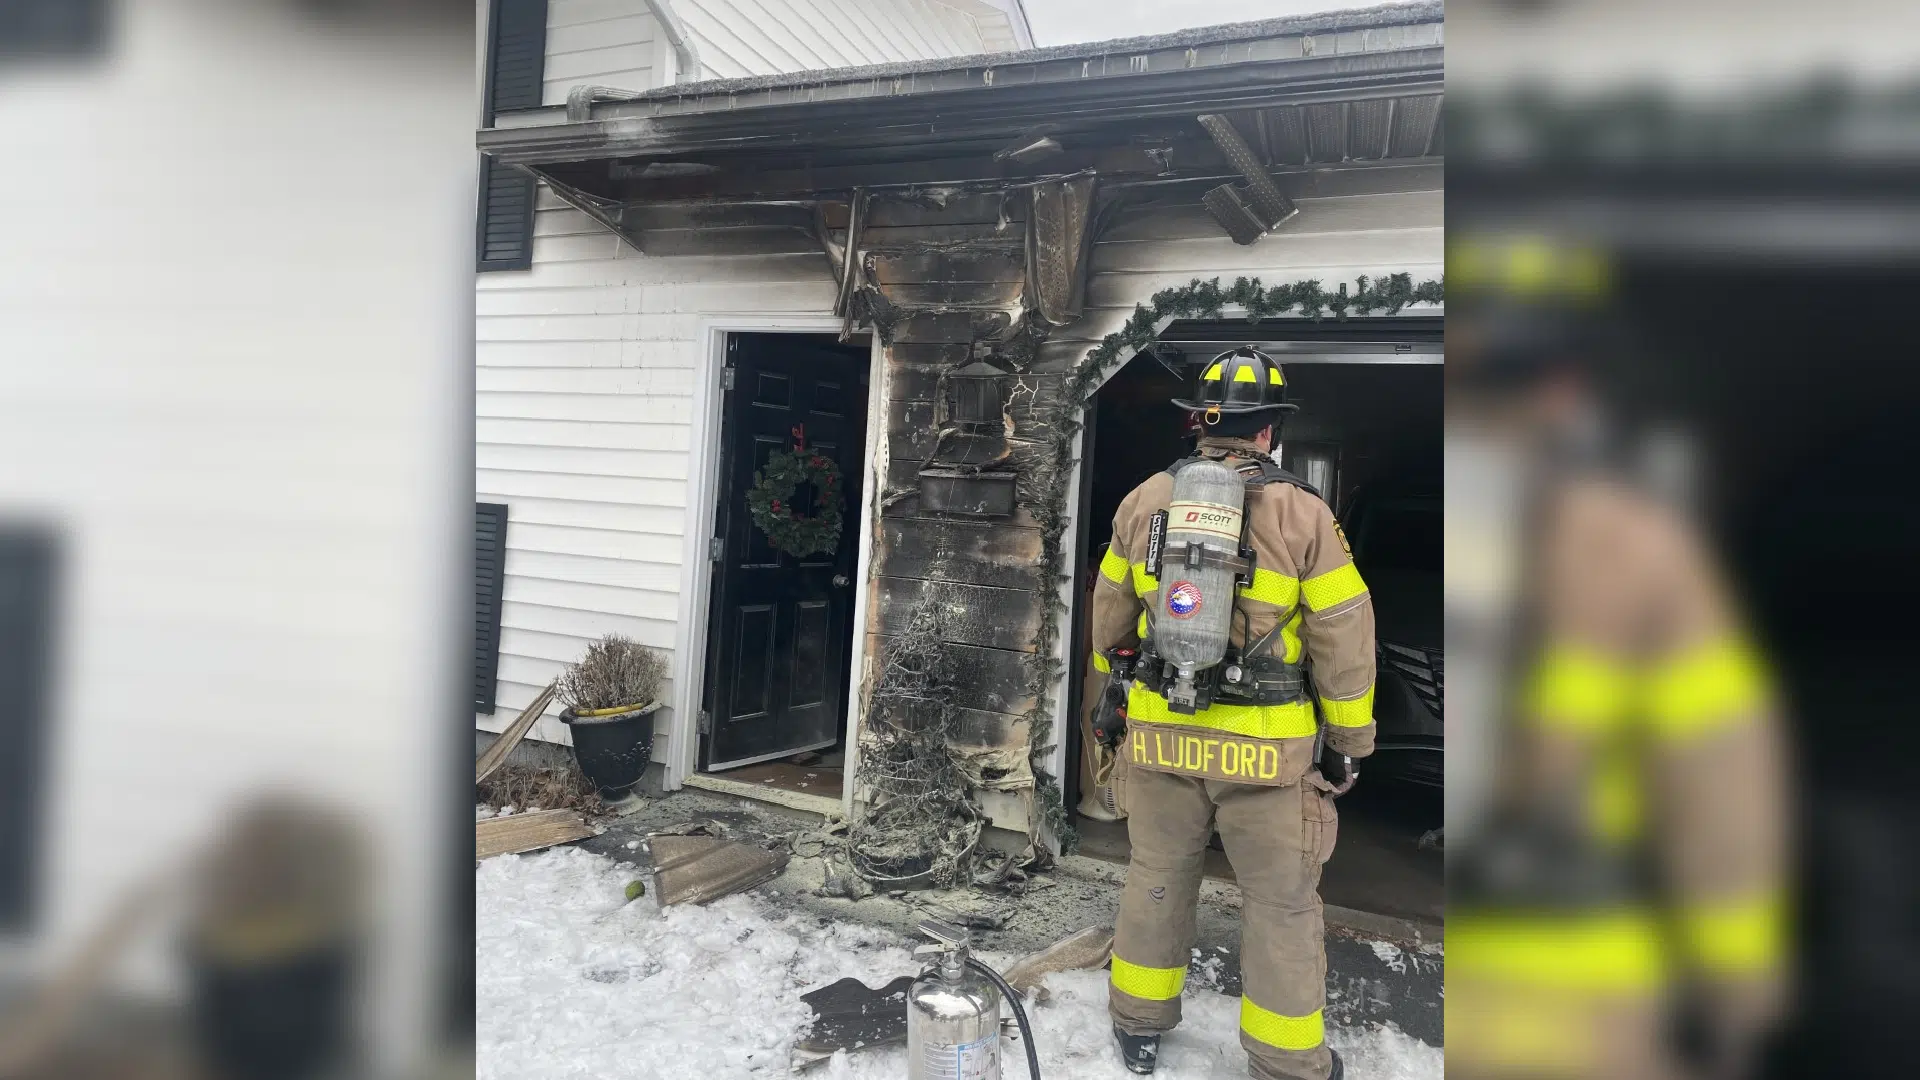 No Injuries After Structure Fire In Quispamsis